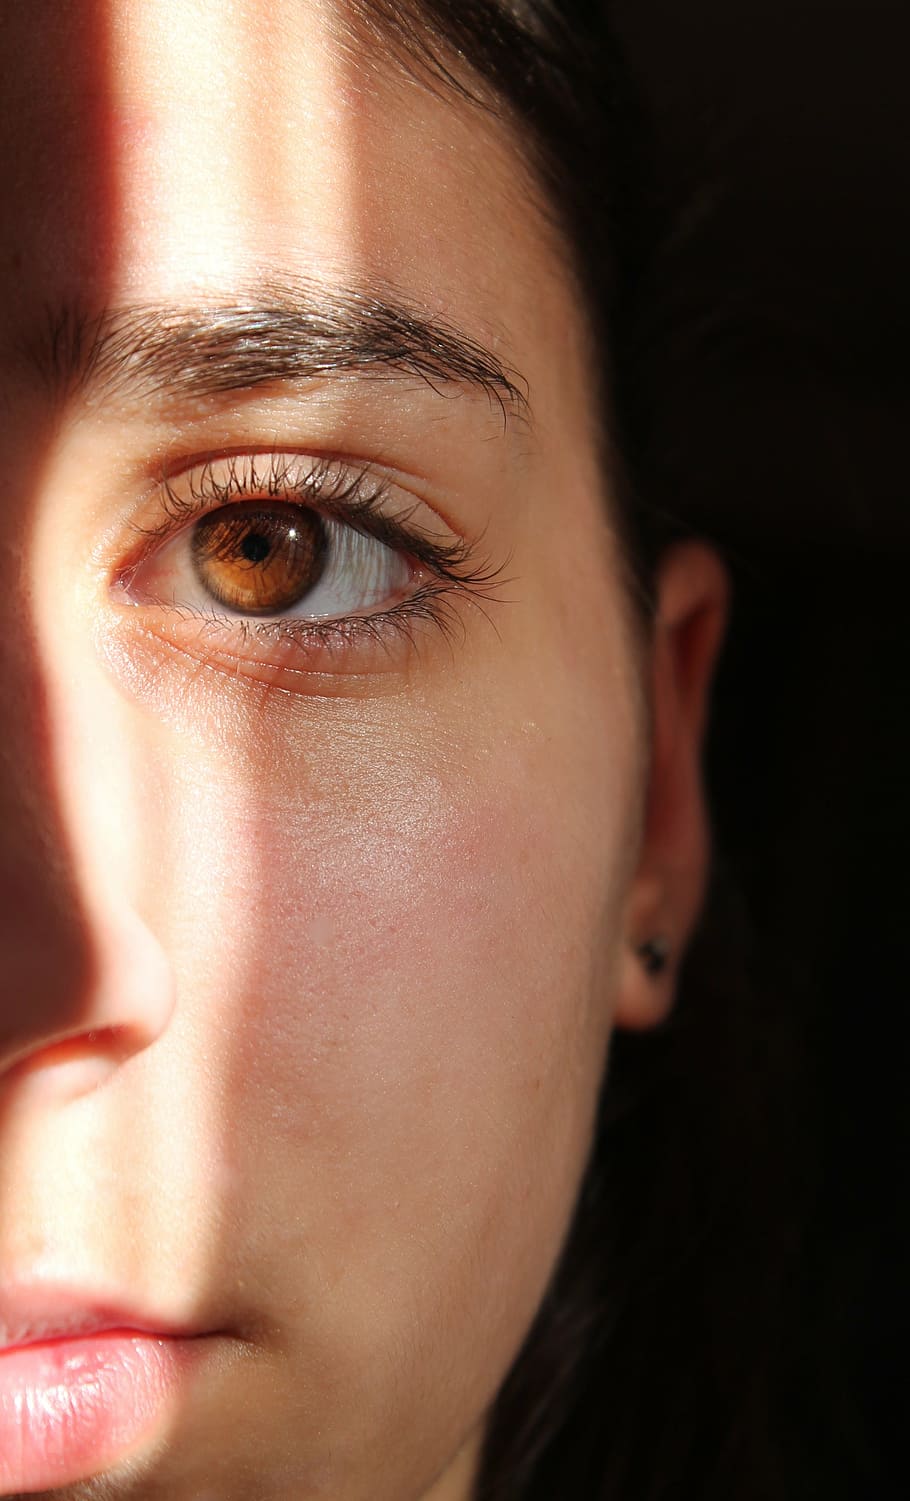 woman, half face, eye, shadow, light, face, girl, nose, mouth, people